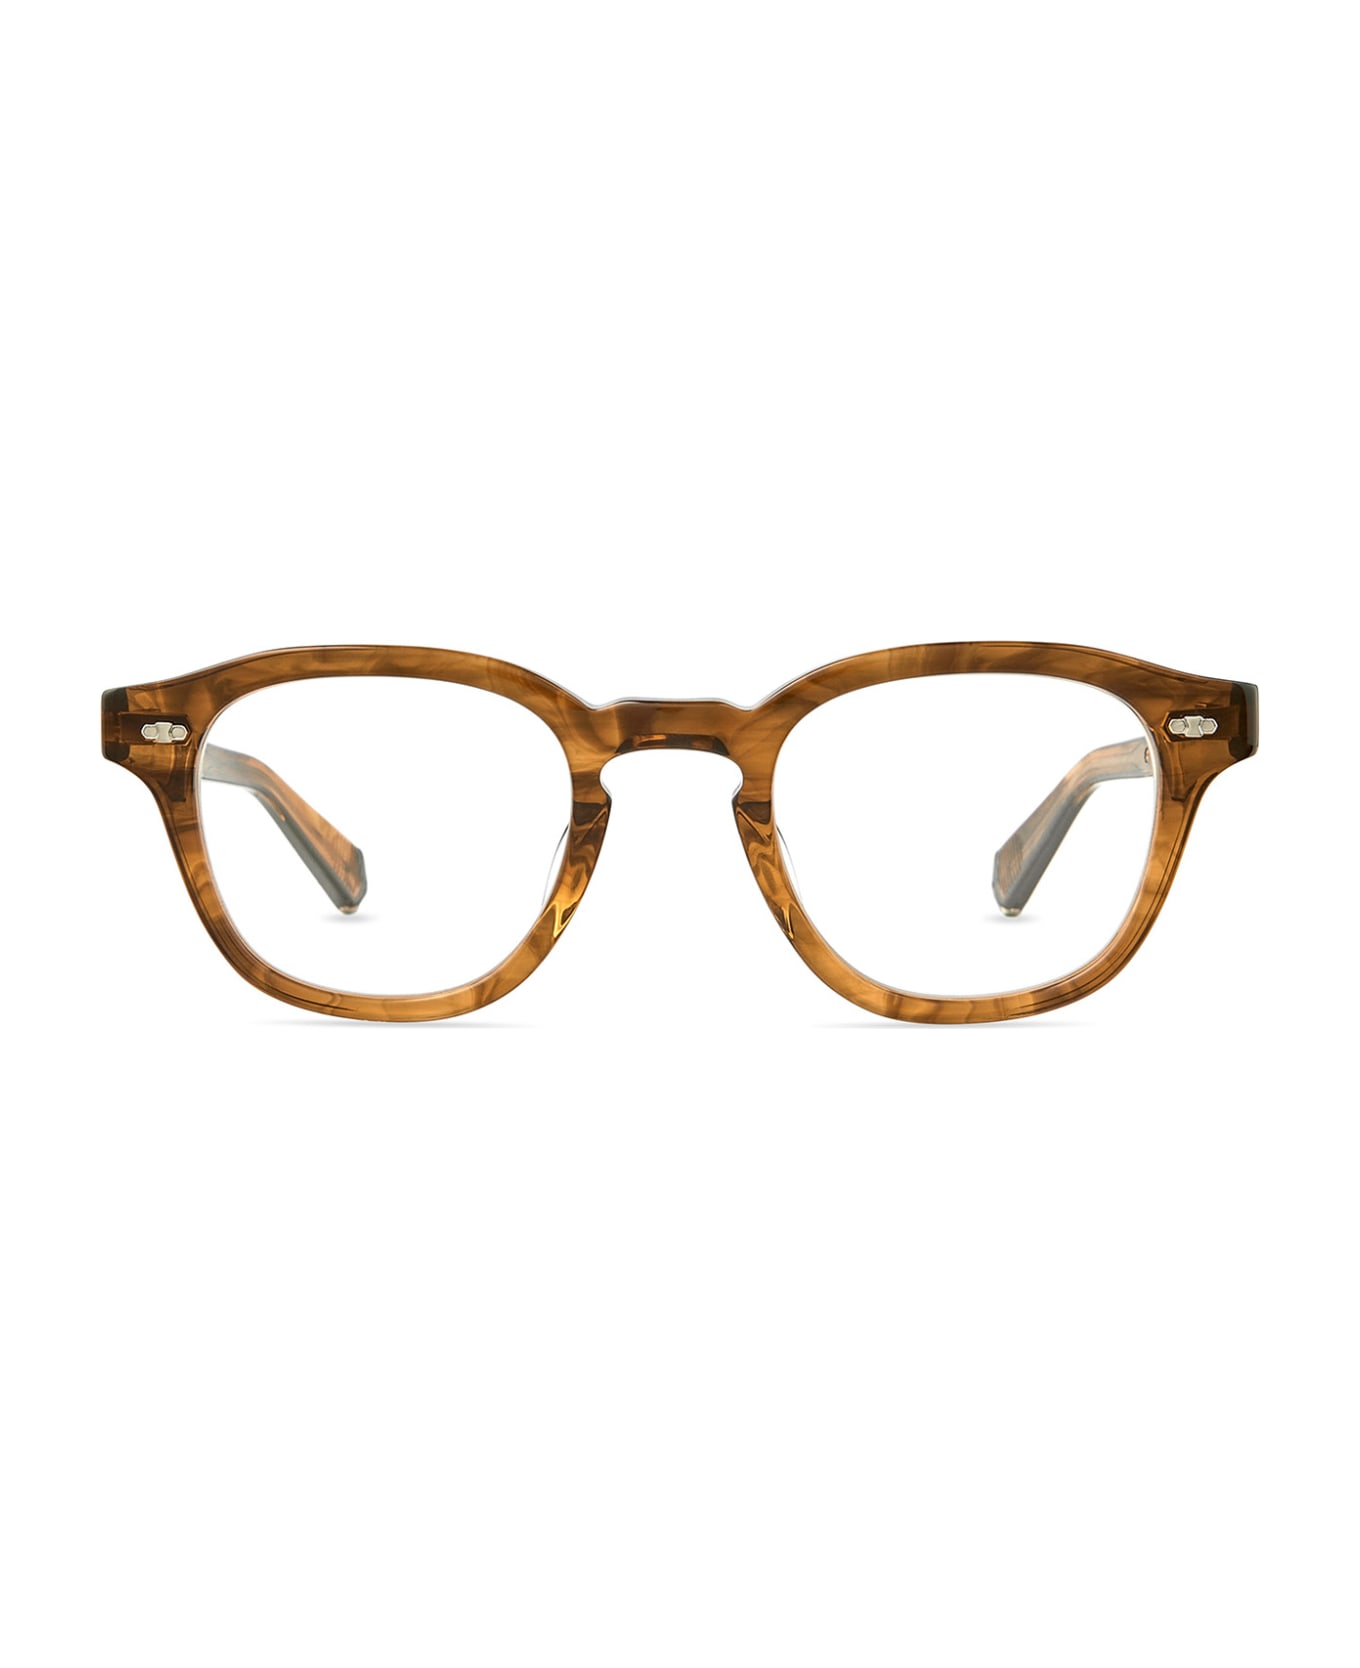 Mr. Leight James C Marbled Rye-white Gold Glasses - Marbled Rye-White Gold